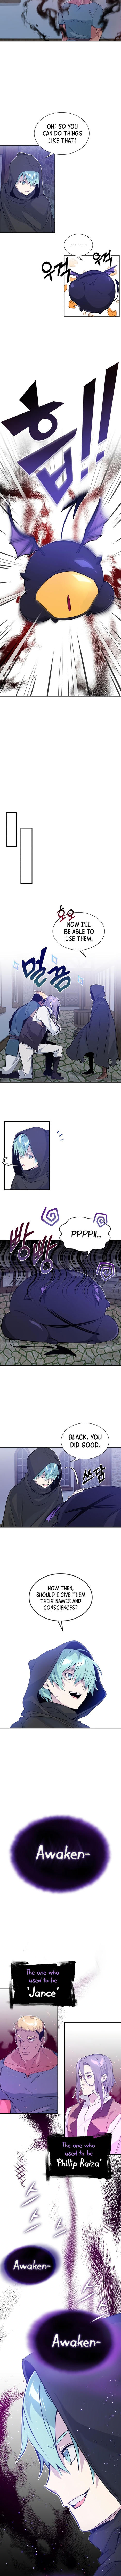 Reincarnated Into A Warlock 66,666 Years Later - Chapter 5 Page 7